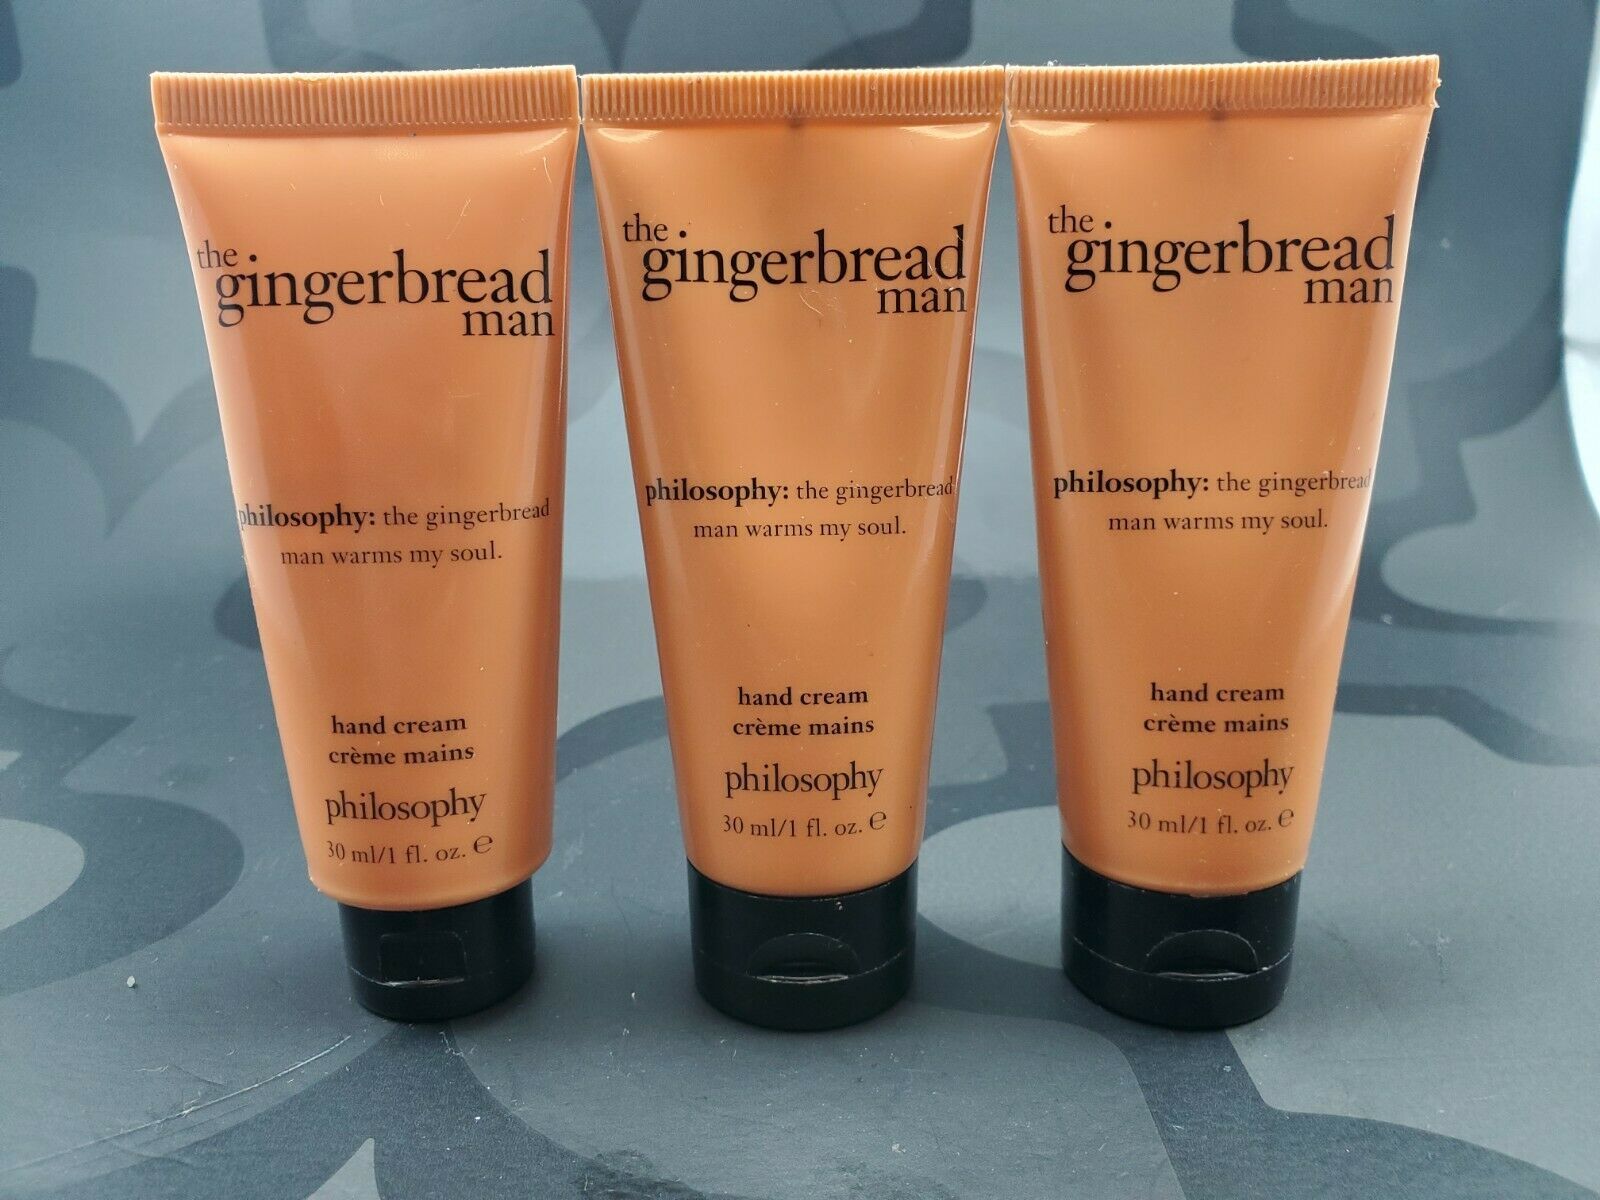 Lot of 3 Philosophy the gingerbread man HAND CREAM 1 oz Sealed - $25.72